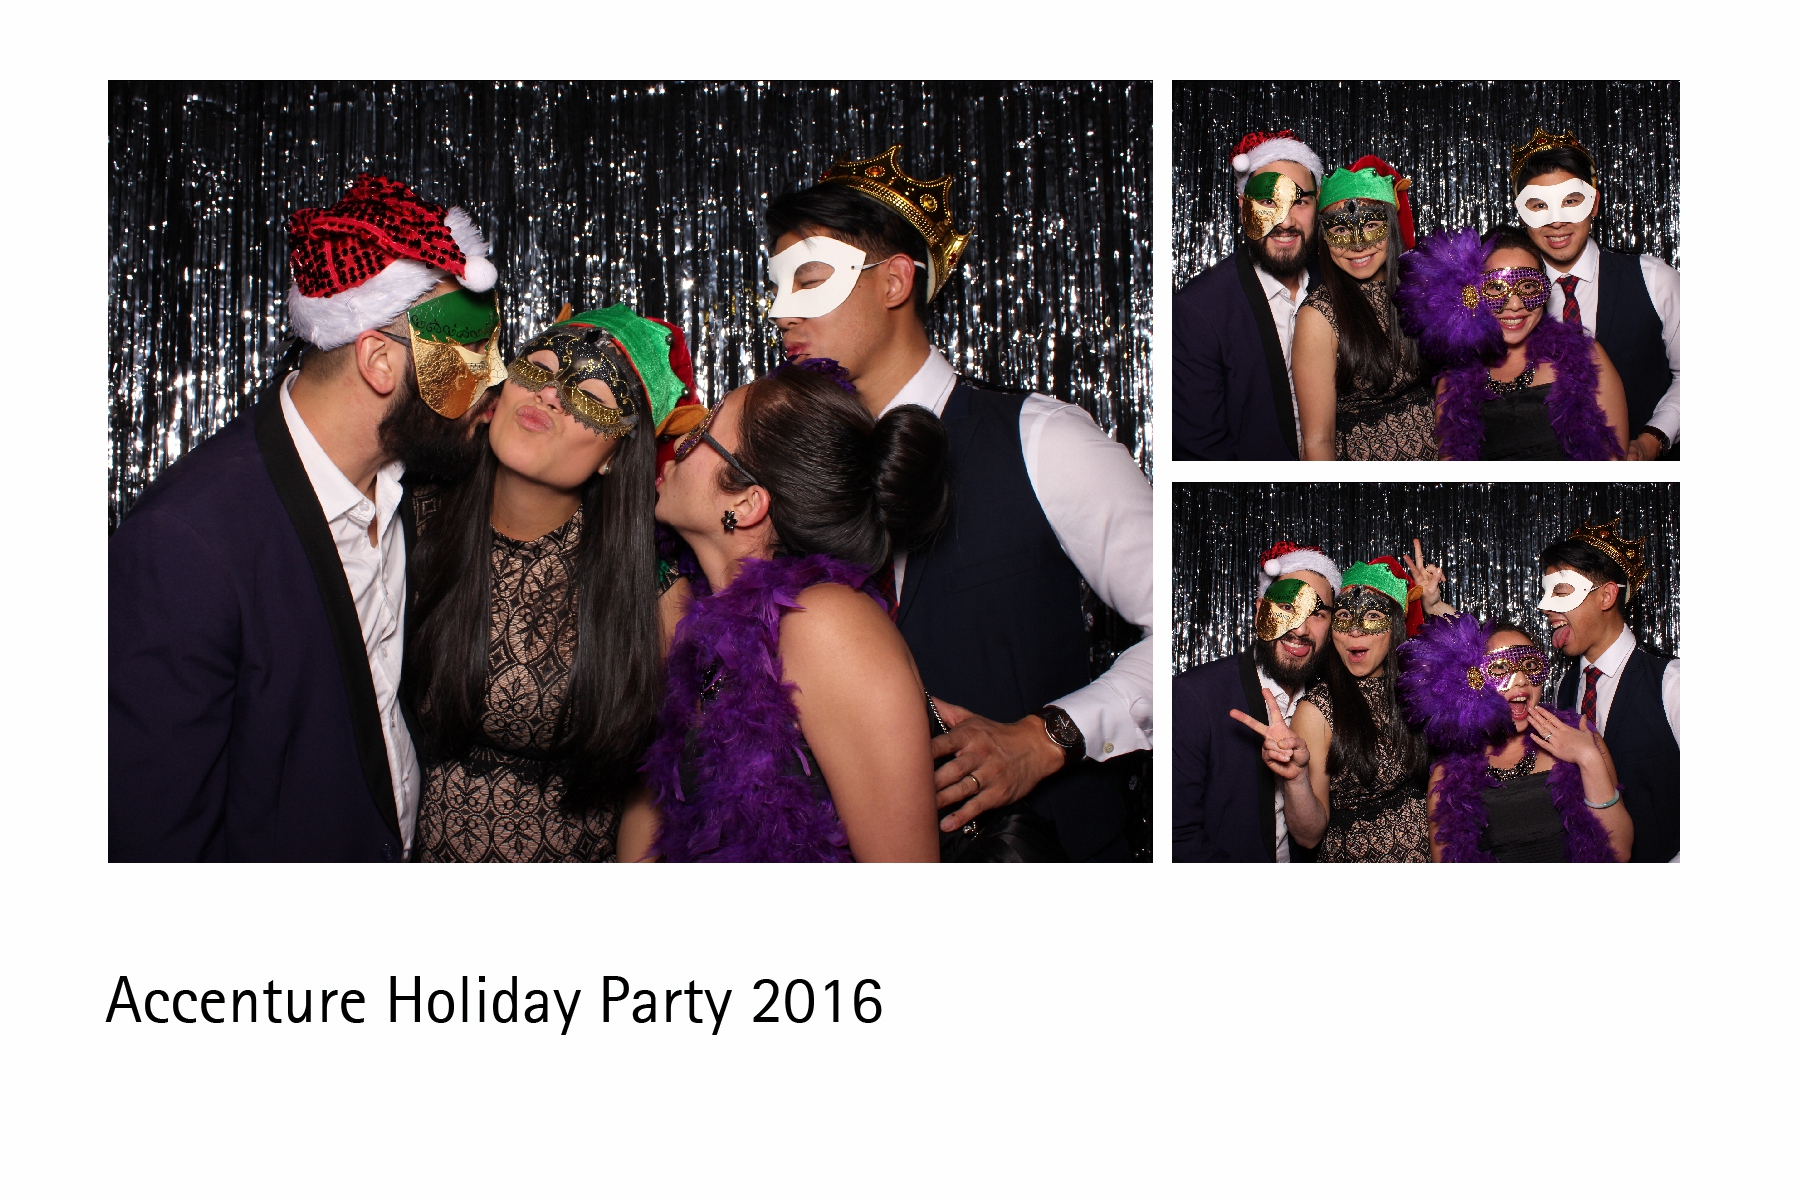 accenture holiday party photo booth with hoopla photobooth wedding rentals